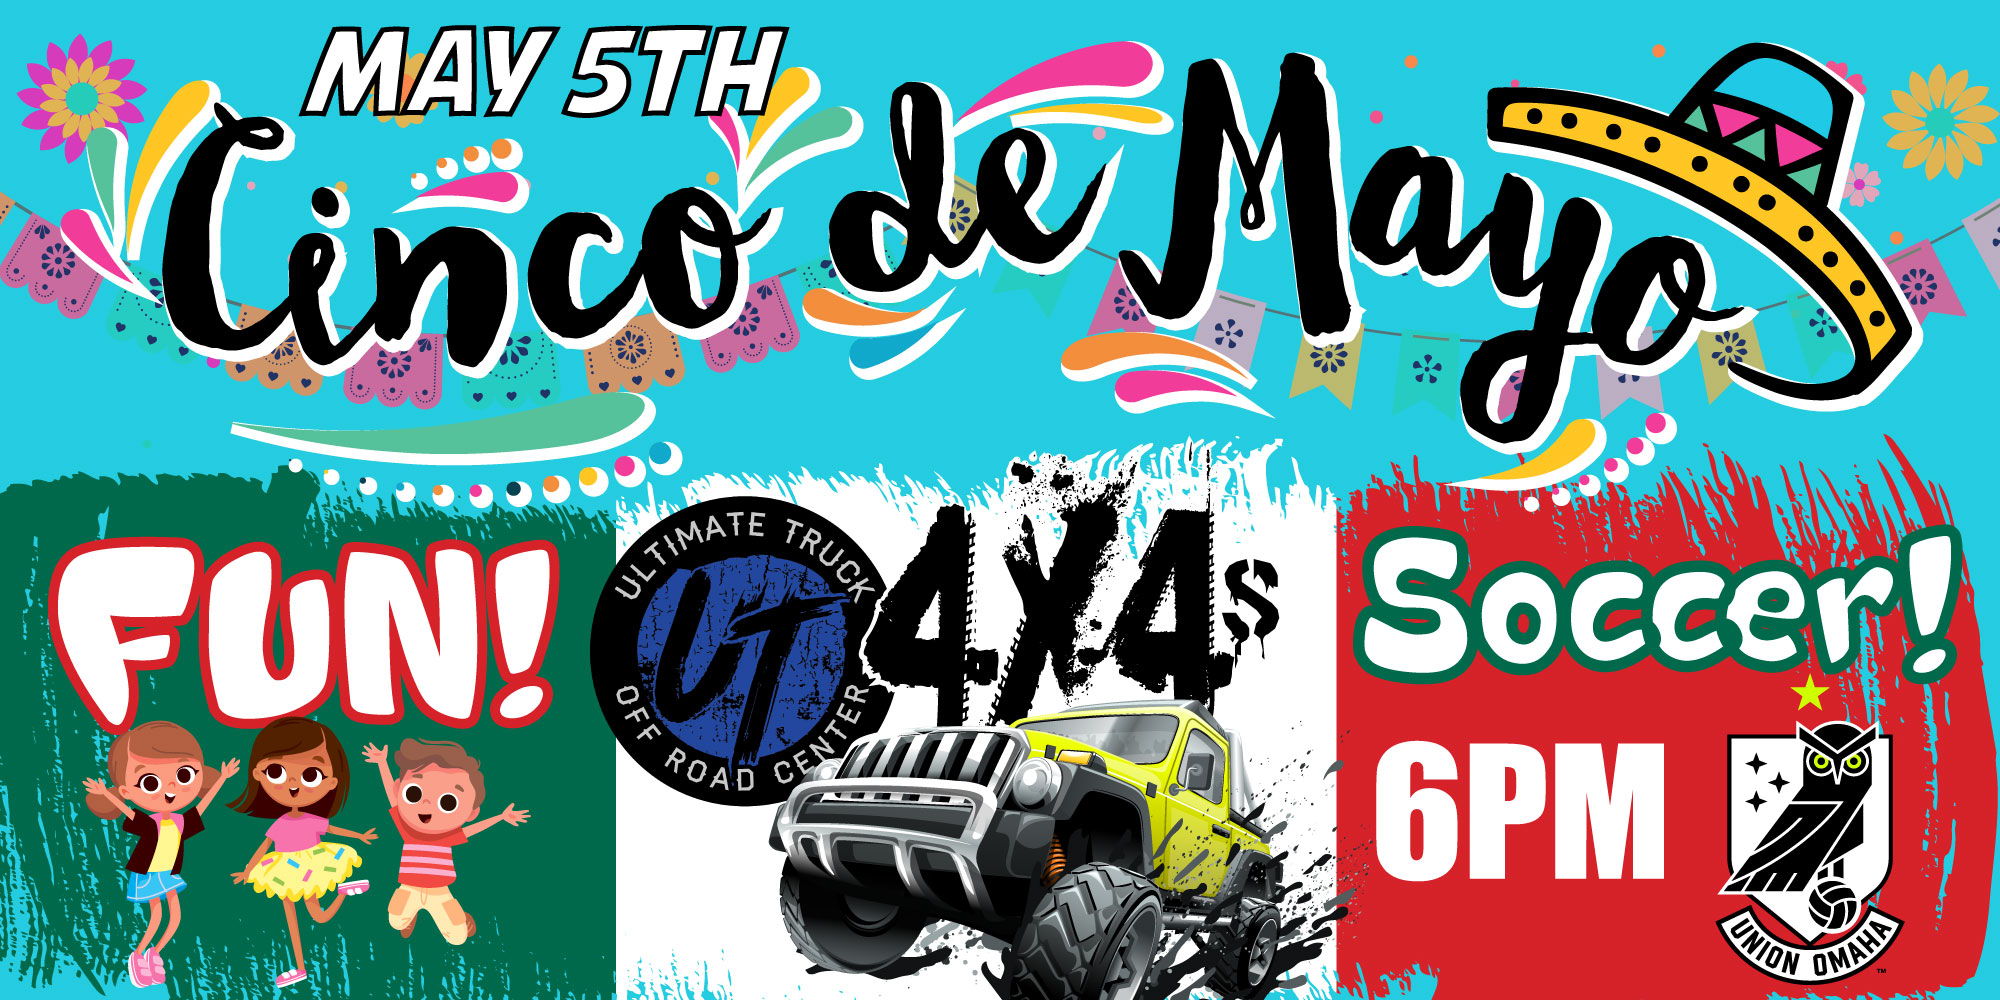 Cinco de Mayo at The Granary promotional image